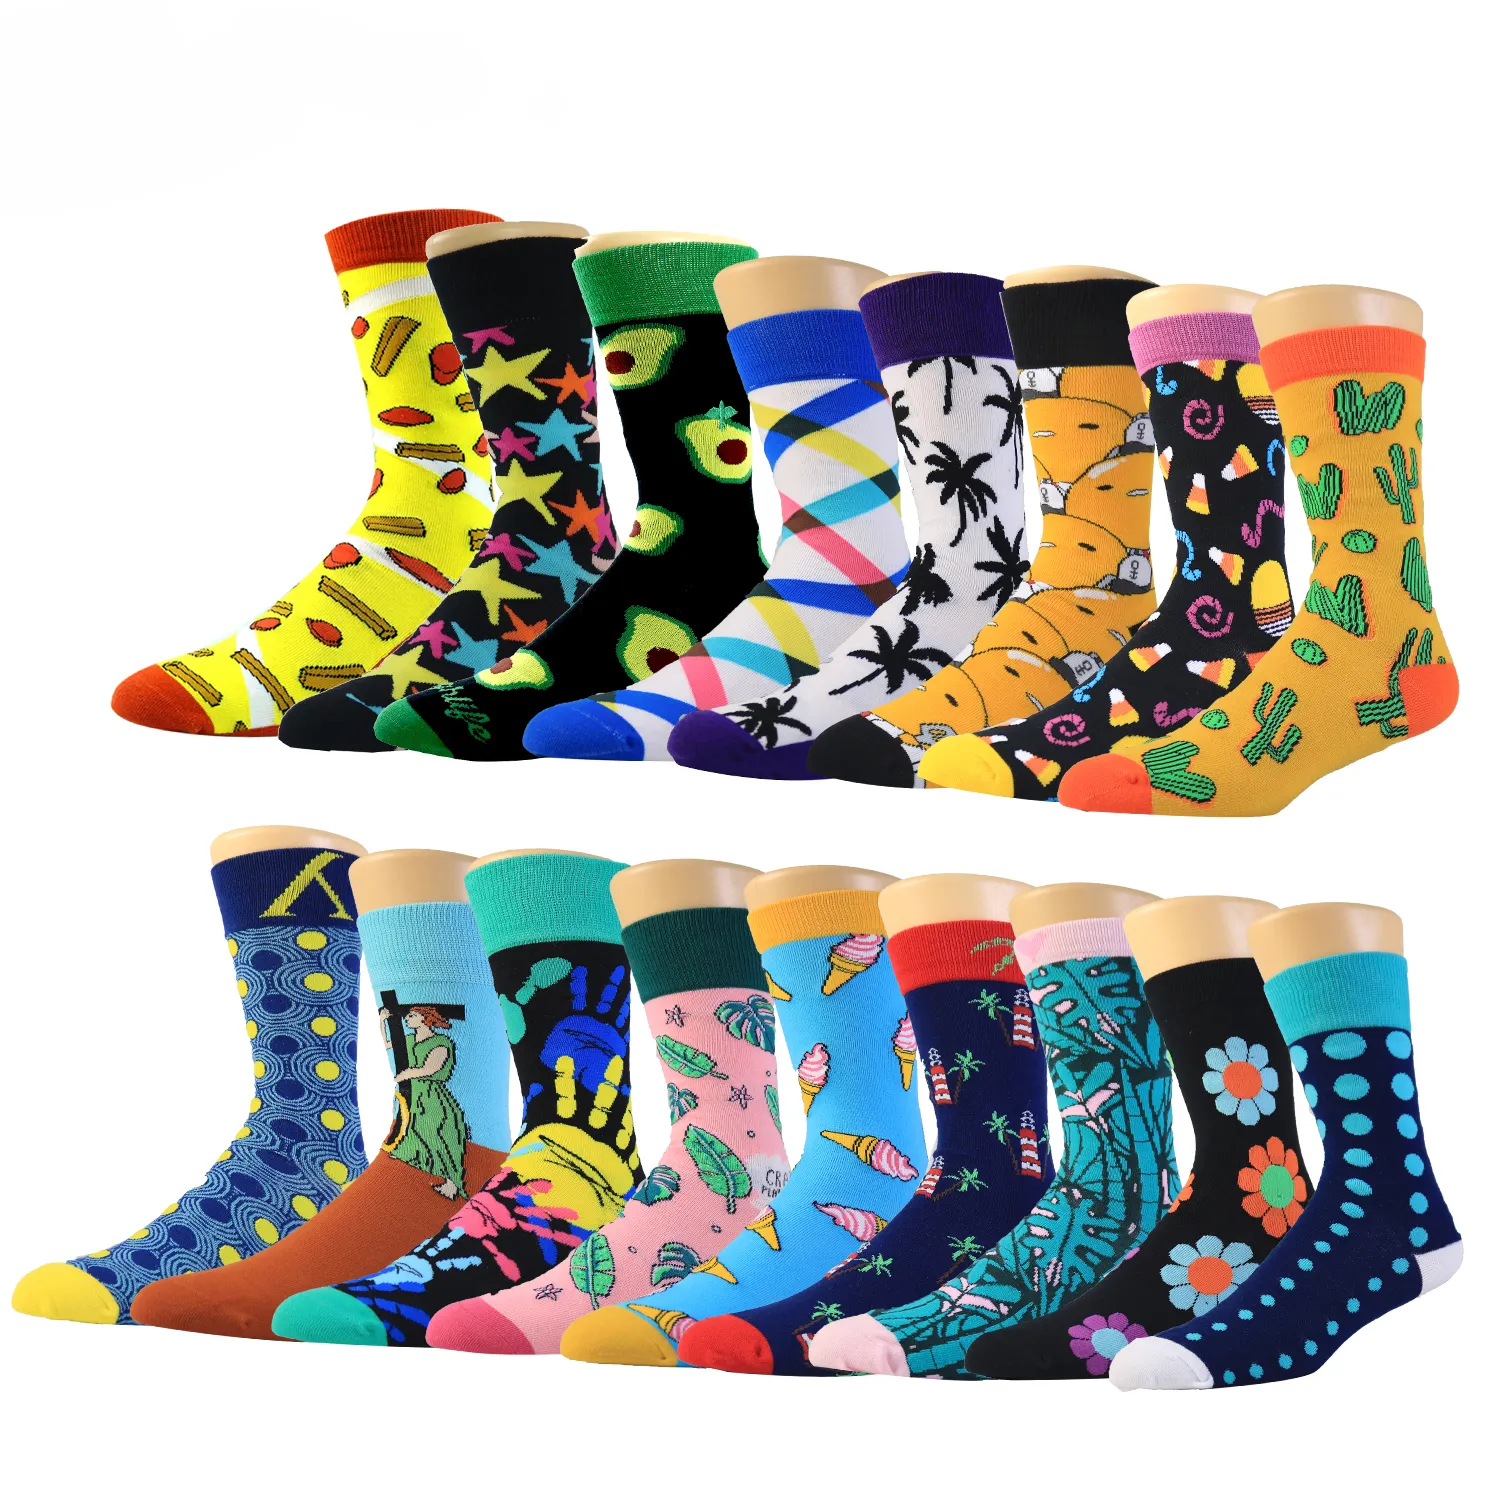 Wholesale custom funny crazied colorful funkied cool mens fashion dress cotton popular socks crew happiness socks for men